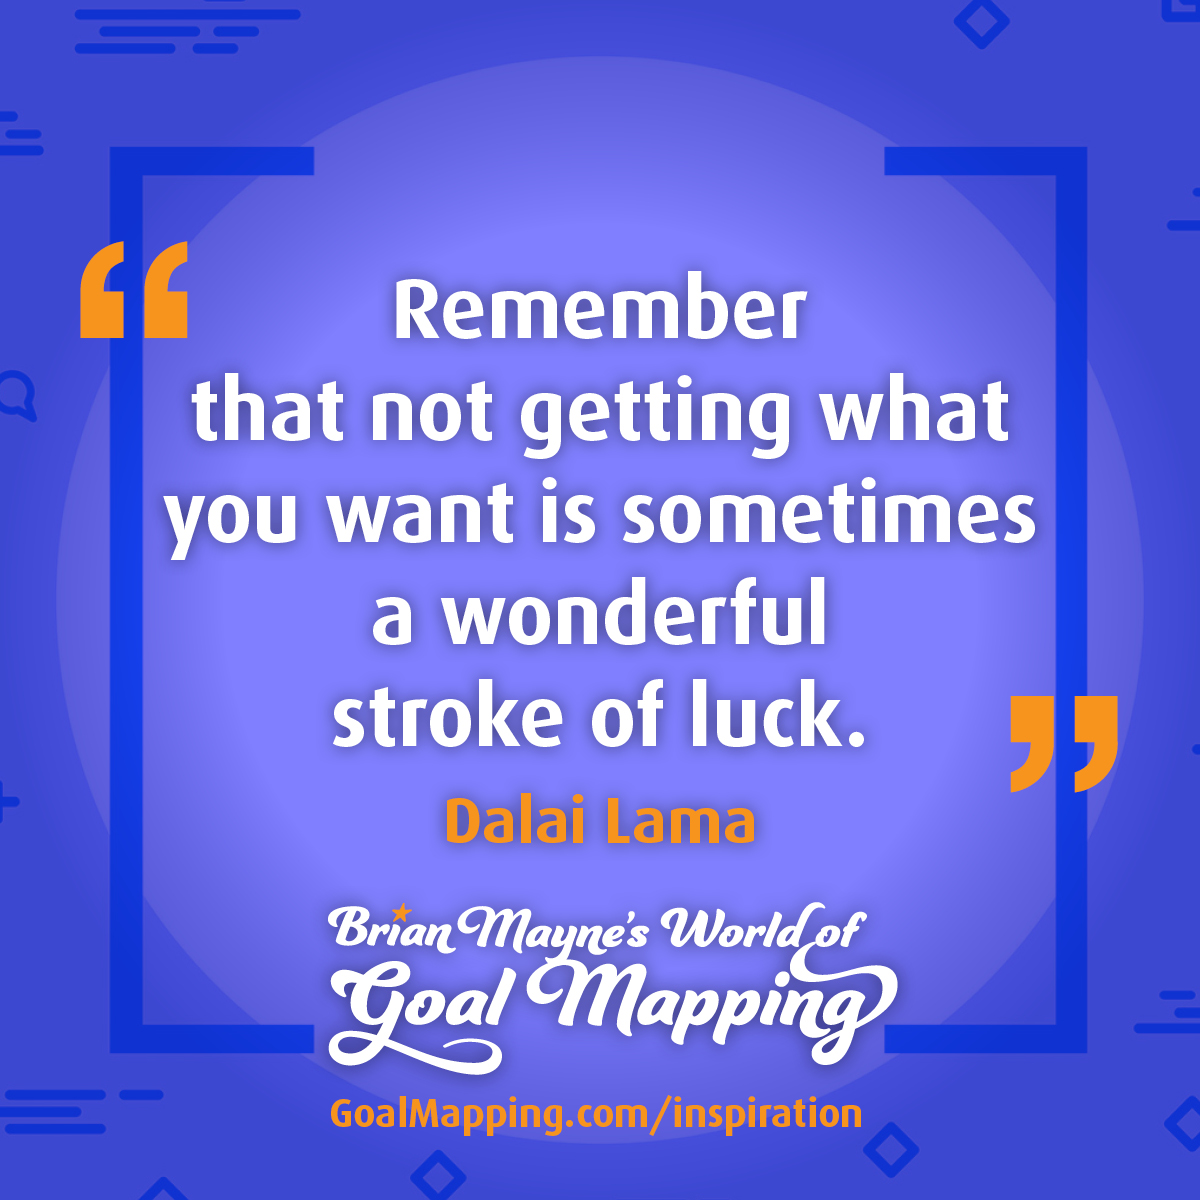 "Remember that not getting what you want is sometimes a wonderful stroke of luck." Dalai Lama